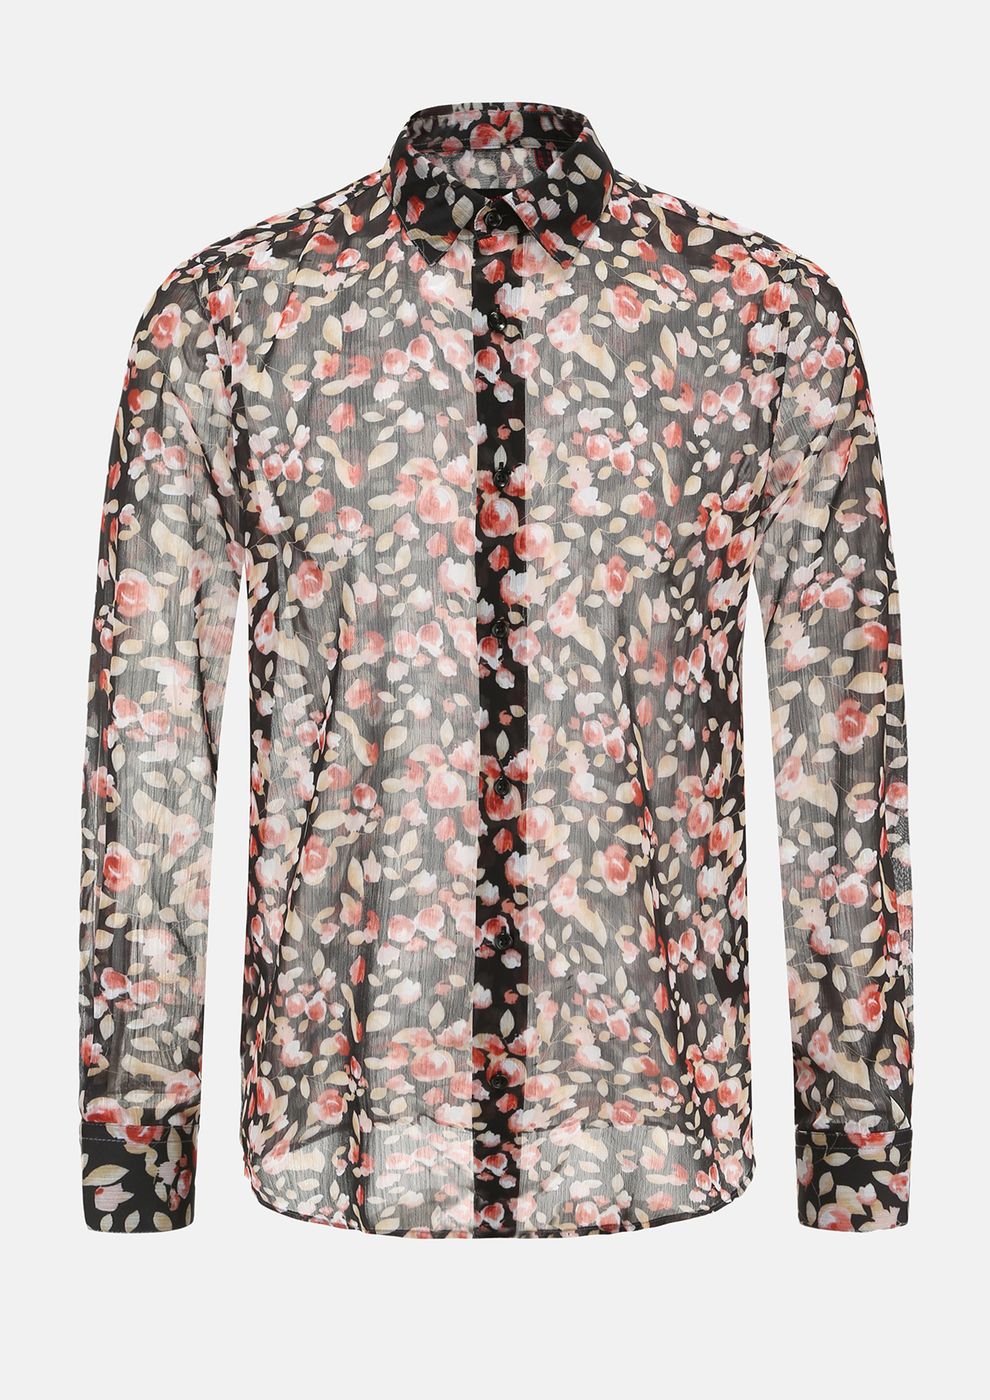 Devils Advocate Slim Fit Long Sleeve Floral Shirt in Black and White